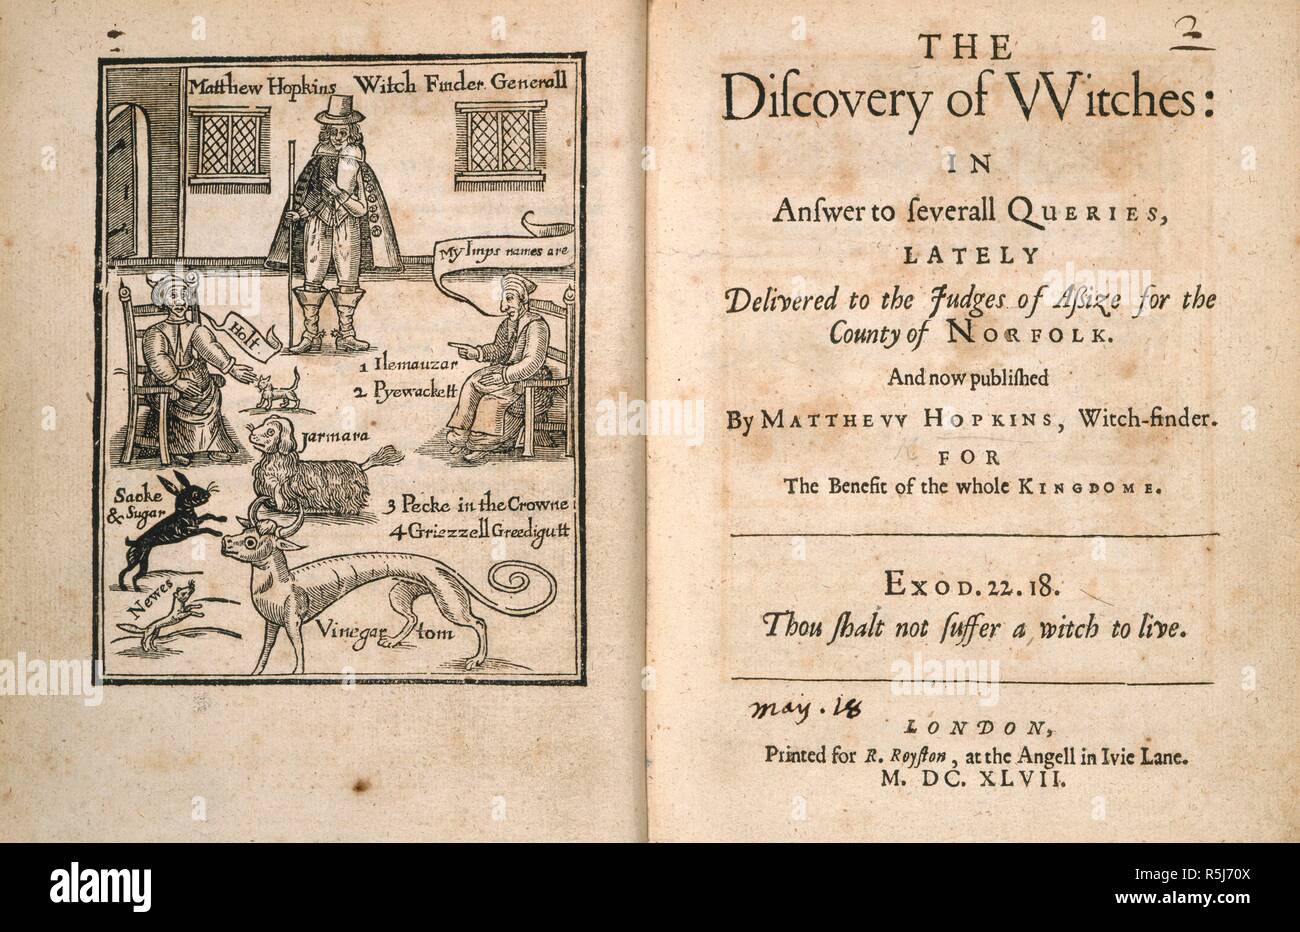 Matthew Hopkins (d.1647). English 'witchfinder-general'. Matthew Hopkins interrogating several witches, with their familiars. The discovery of witches: in answer to severall Queries, lately delivered to the Judges of Assize for the County of Norfolk. And now published by Matthew Hopkins Witch-finder, for the benefit of the whole kingdome. For R. Royston: London, 1647. Source: E.388.(2), title page and frontispiece. Language: English. Stock Photo